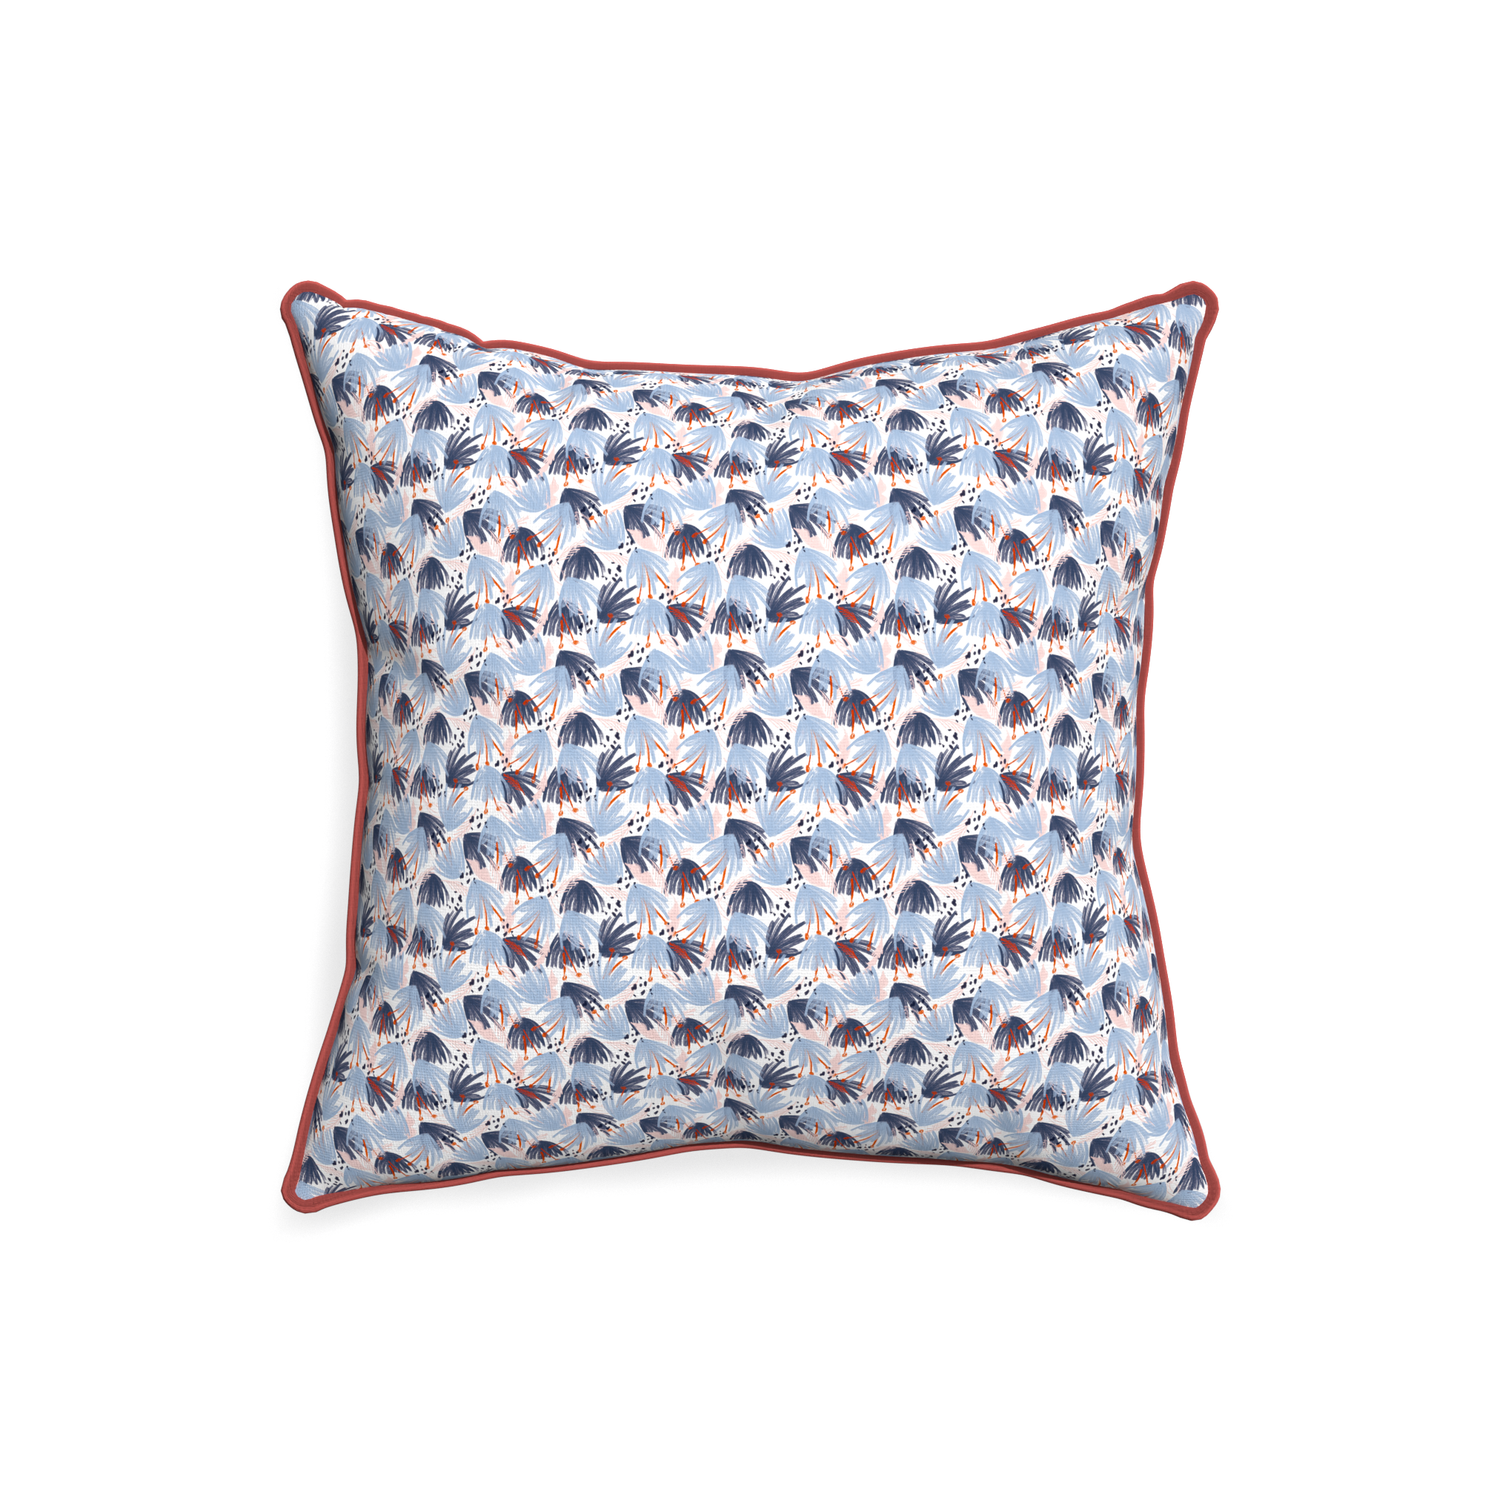 20-square eden blue custom pillow with c piping on white background